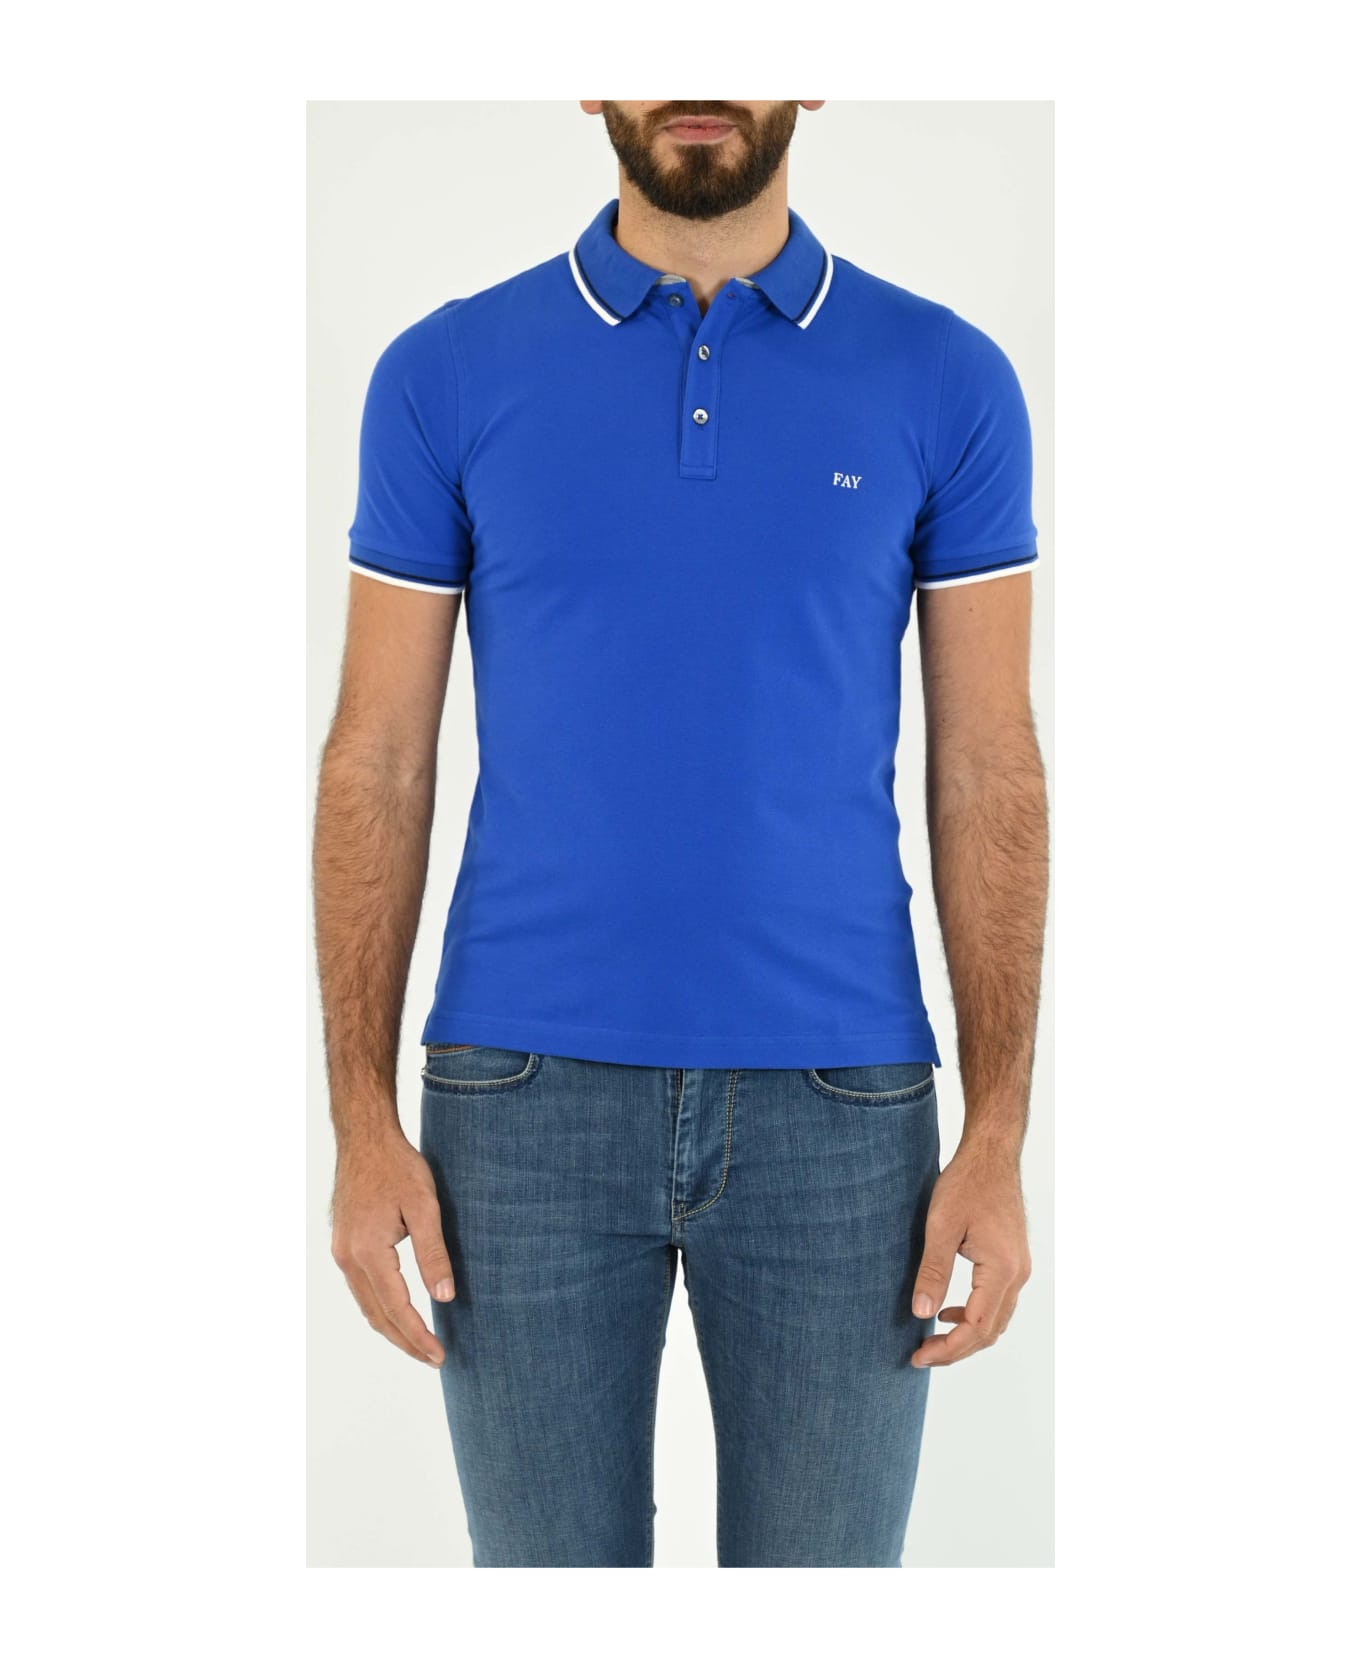 Fay Polo Shirt In Blue Cotton - BLUE ポロシャツ